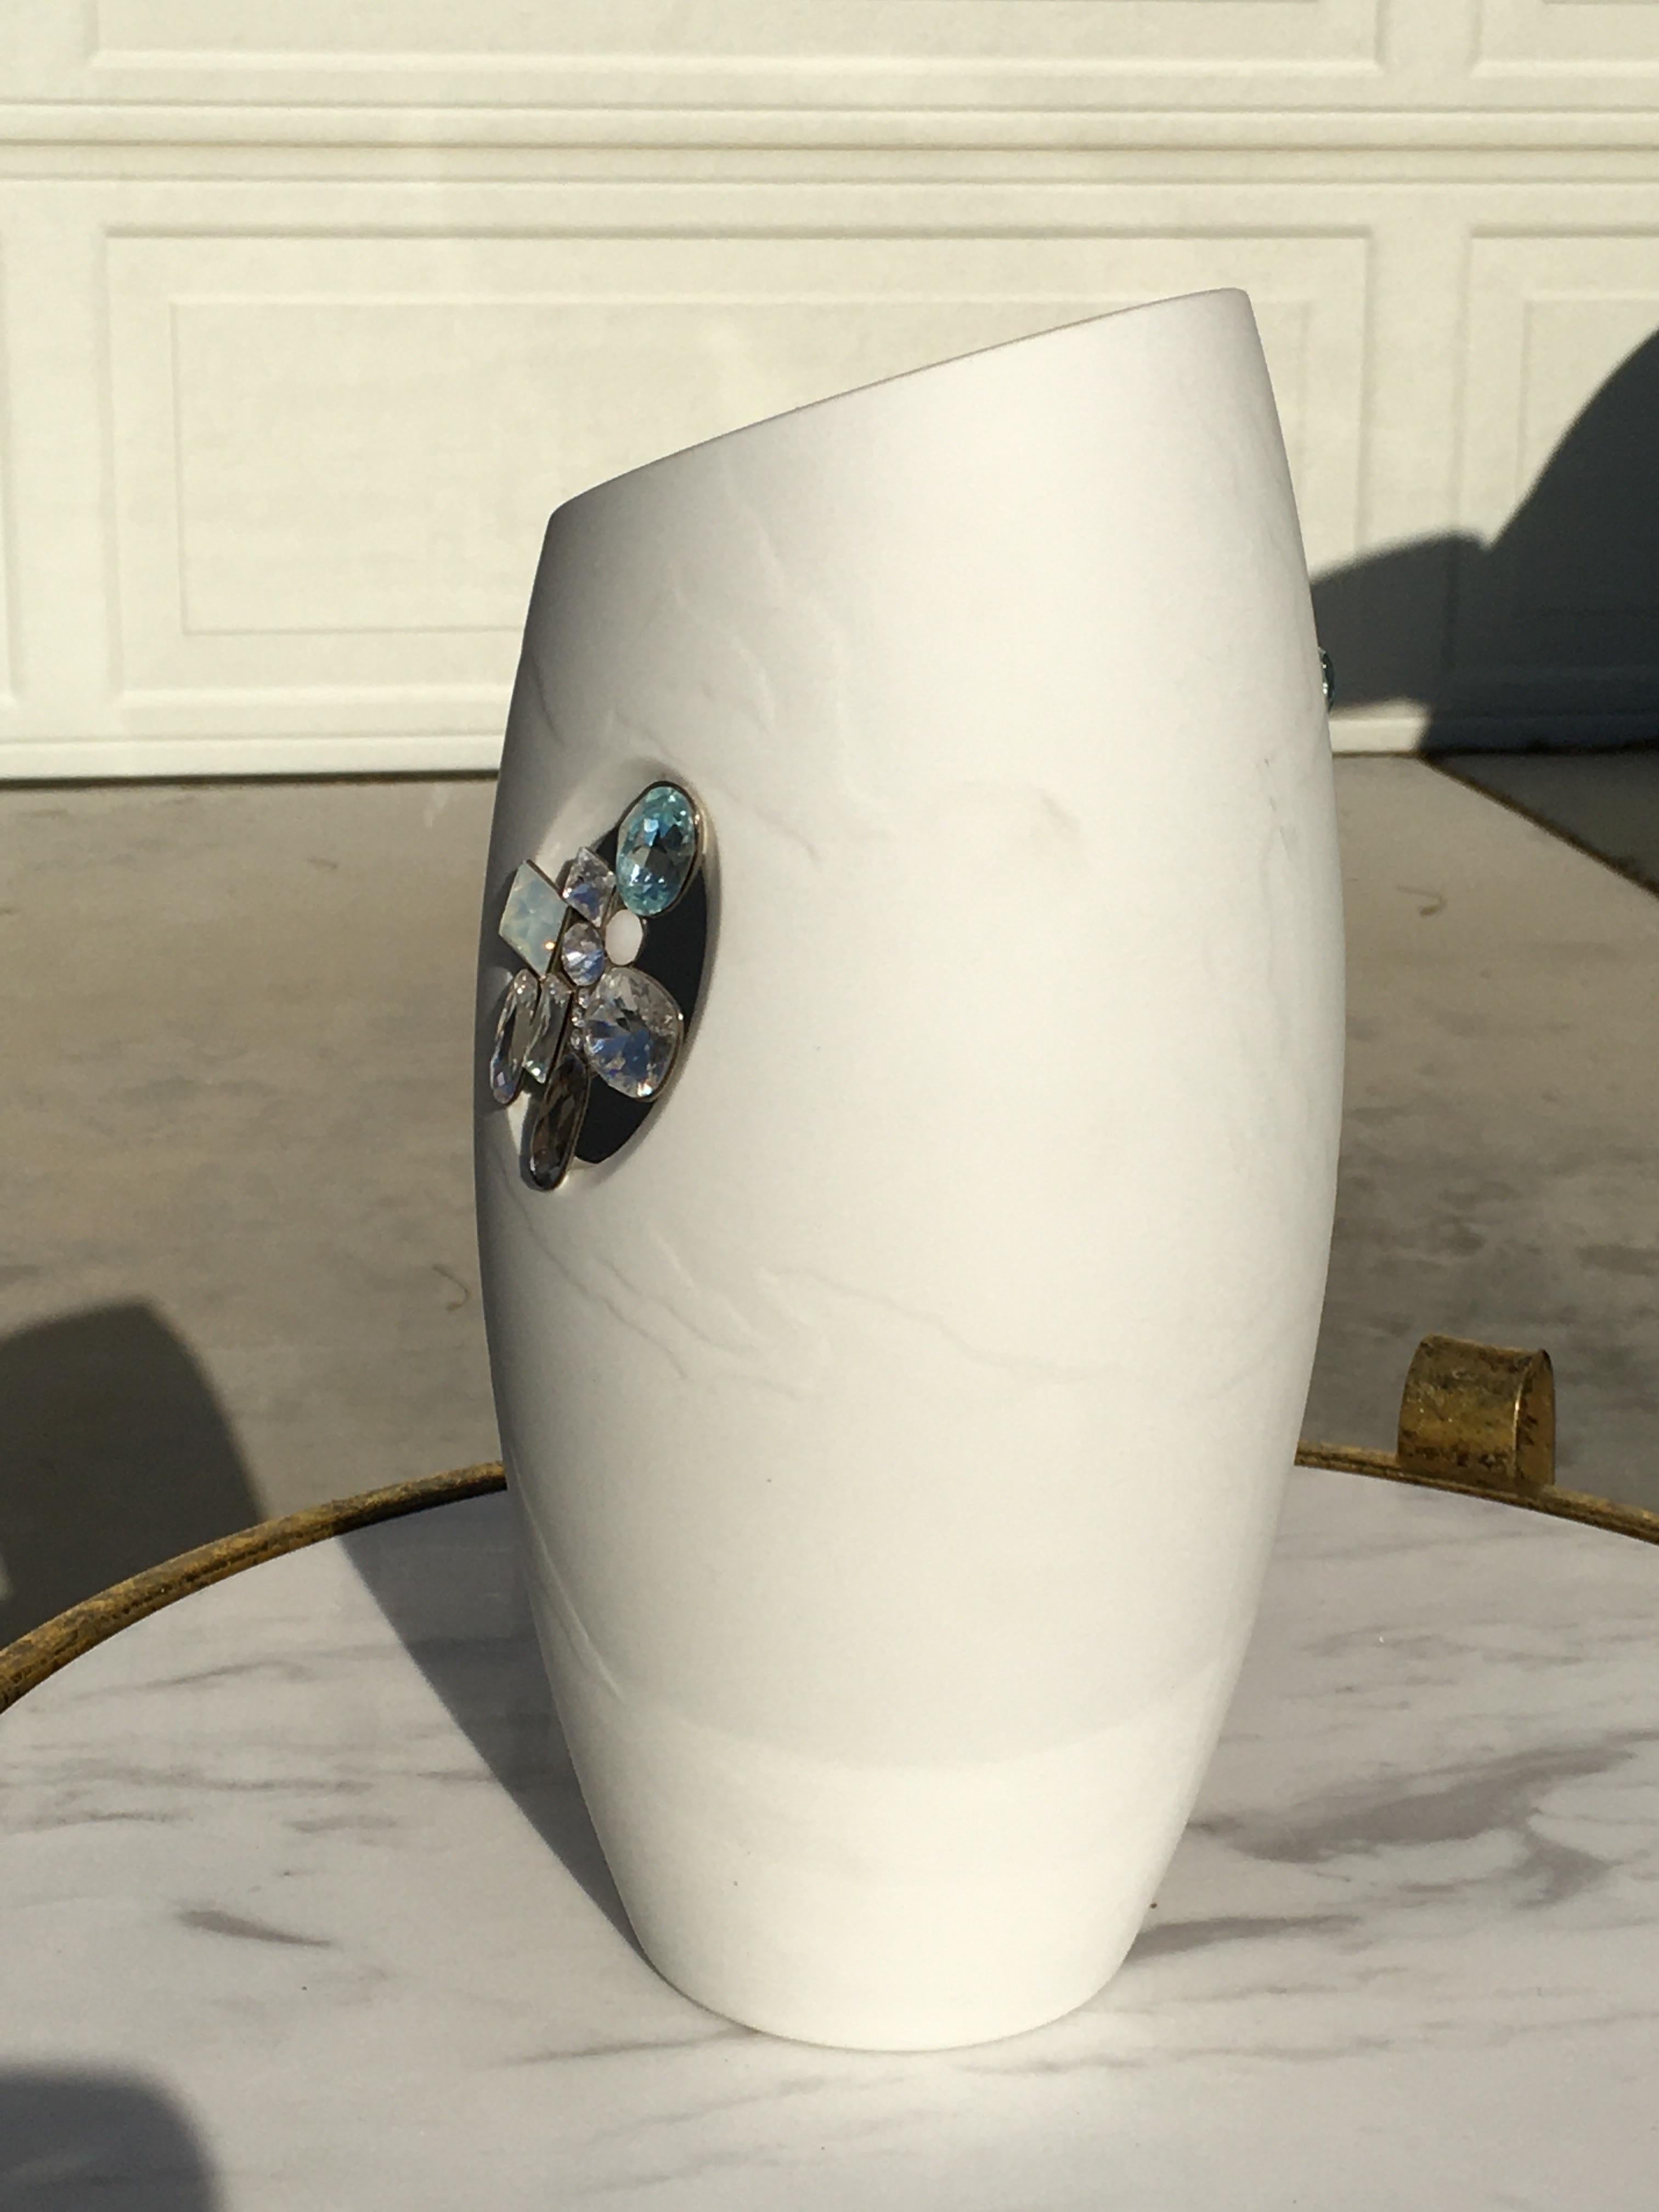 Hand-Crafted Tro of Swarovski Porcelain & Jeweld Crystal “Milik” Vases Rare Sold Out Edition  For Sale